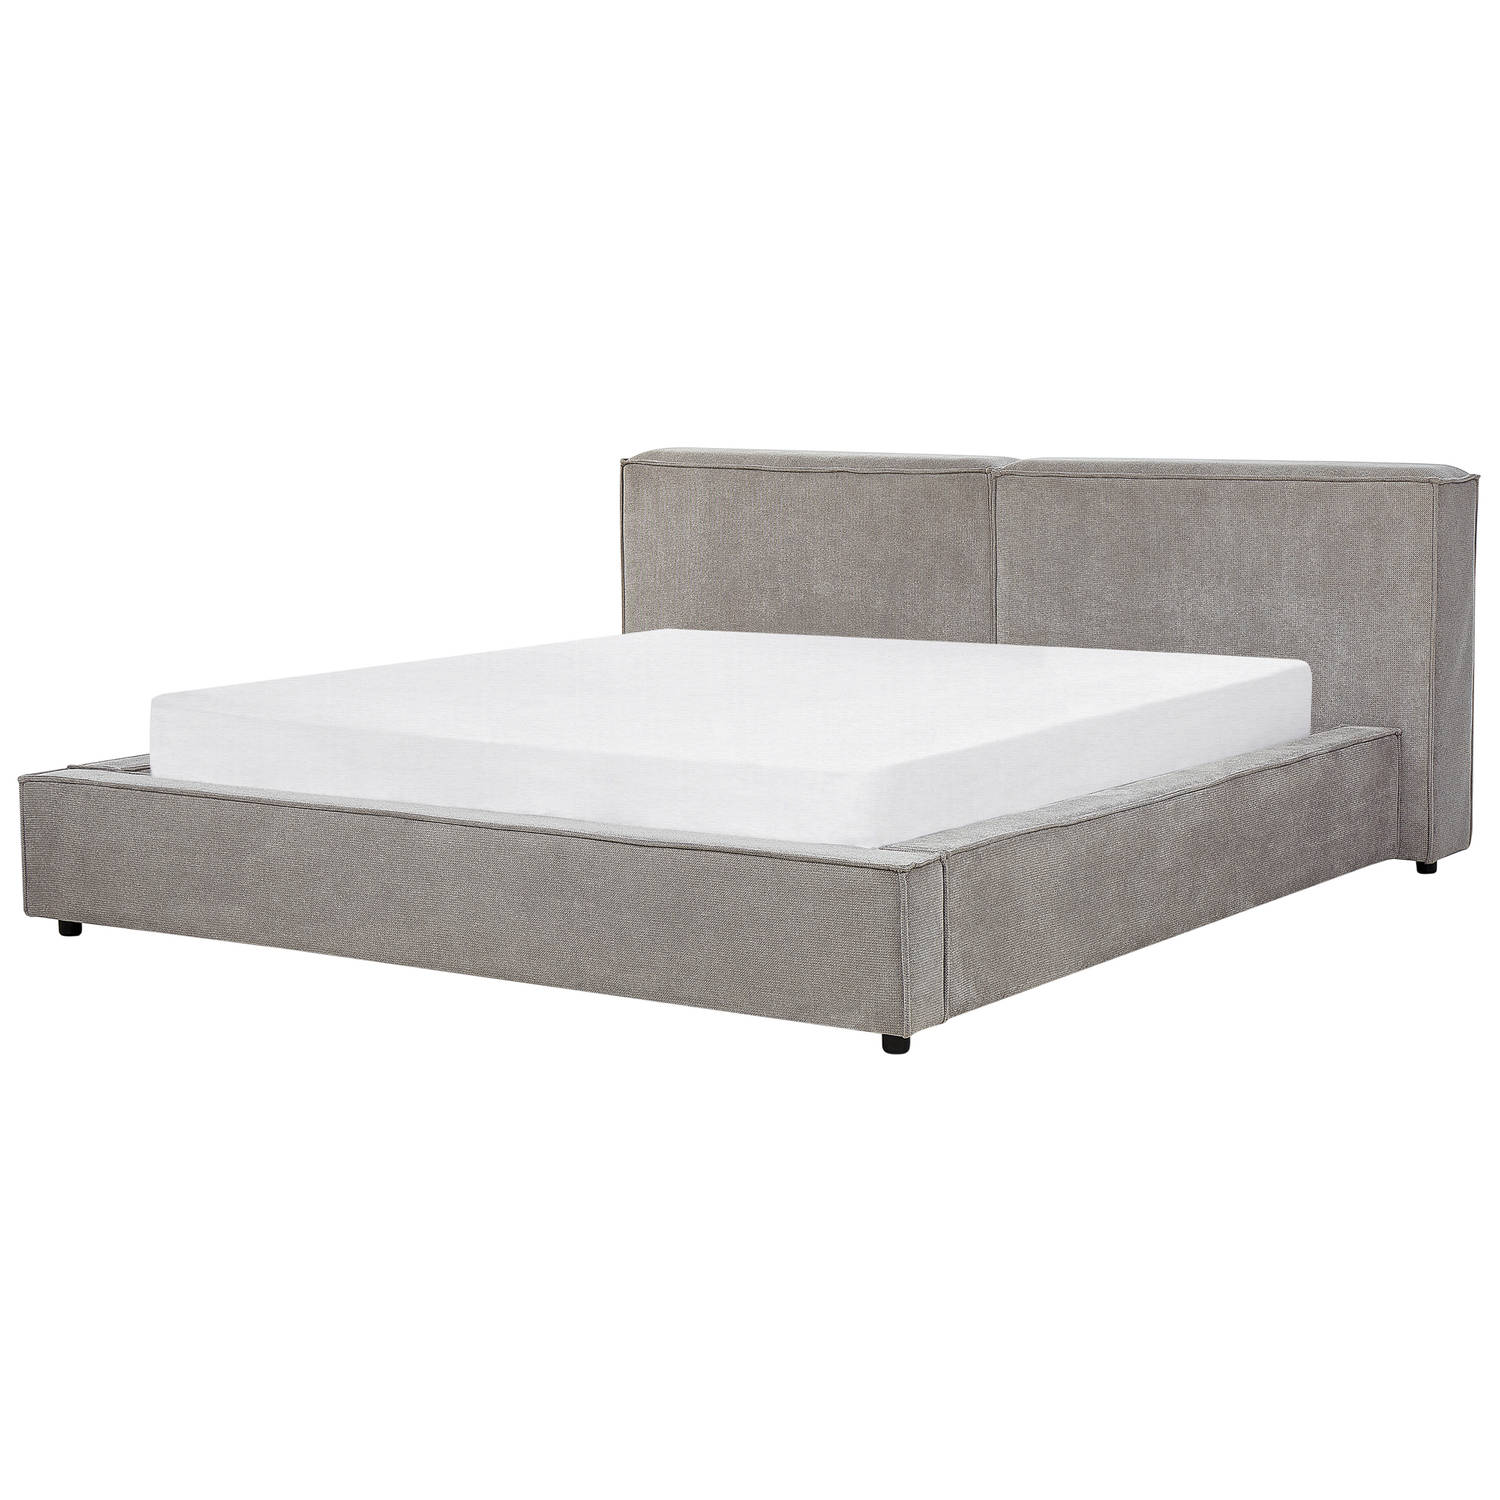 LINARDS - Bed - Grijs - 180 x 200 cm - Polyester